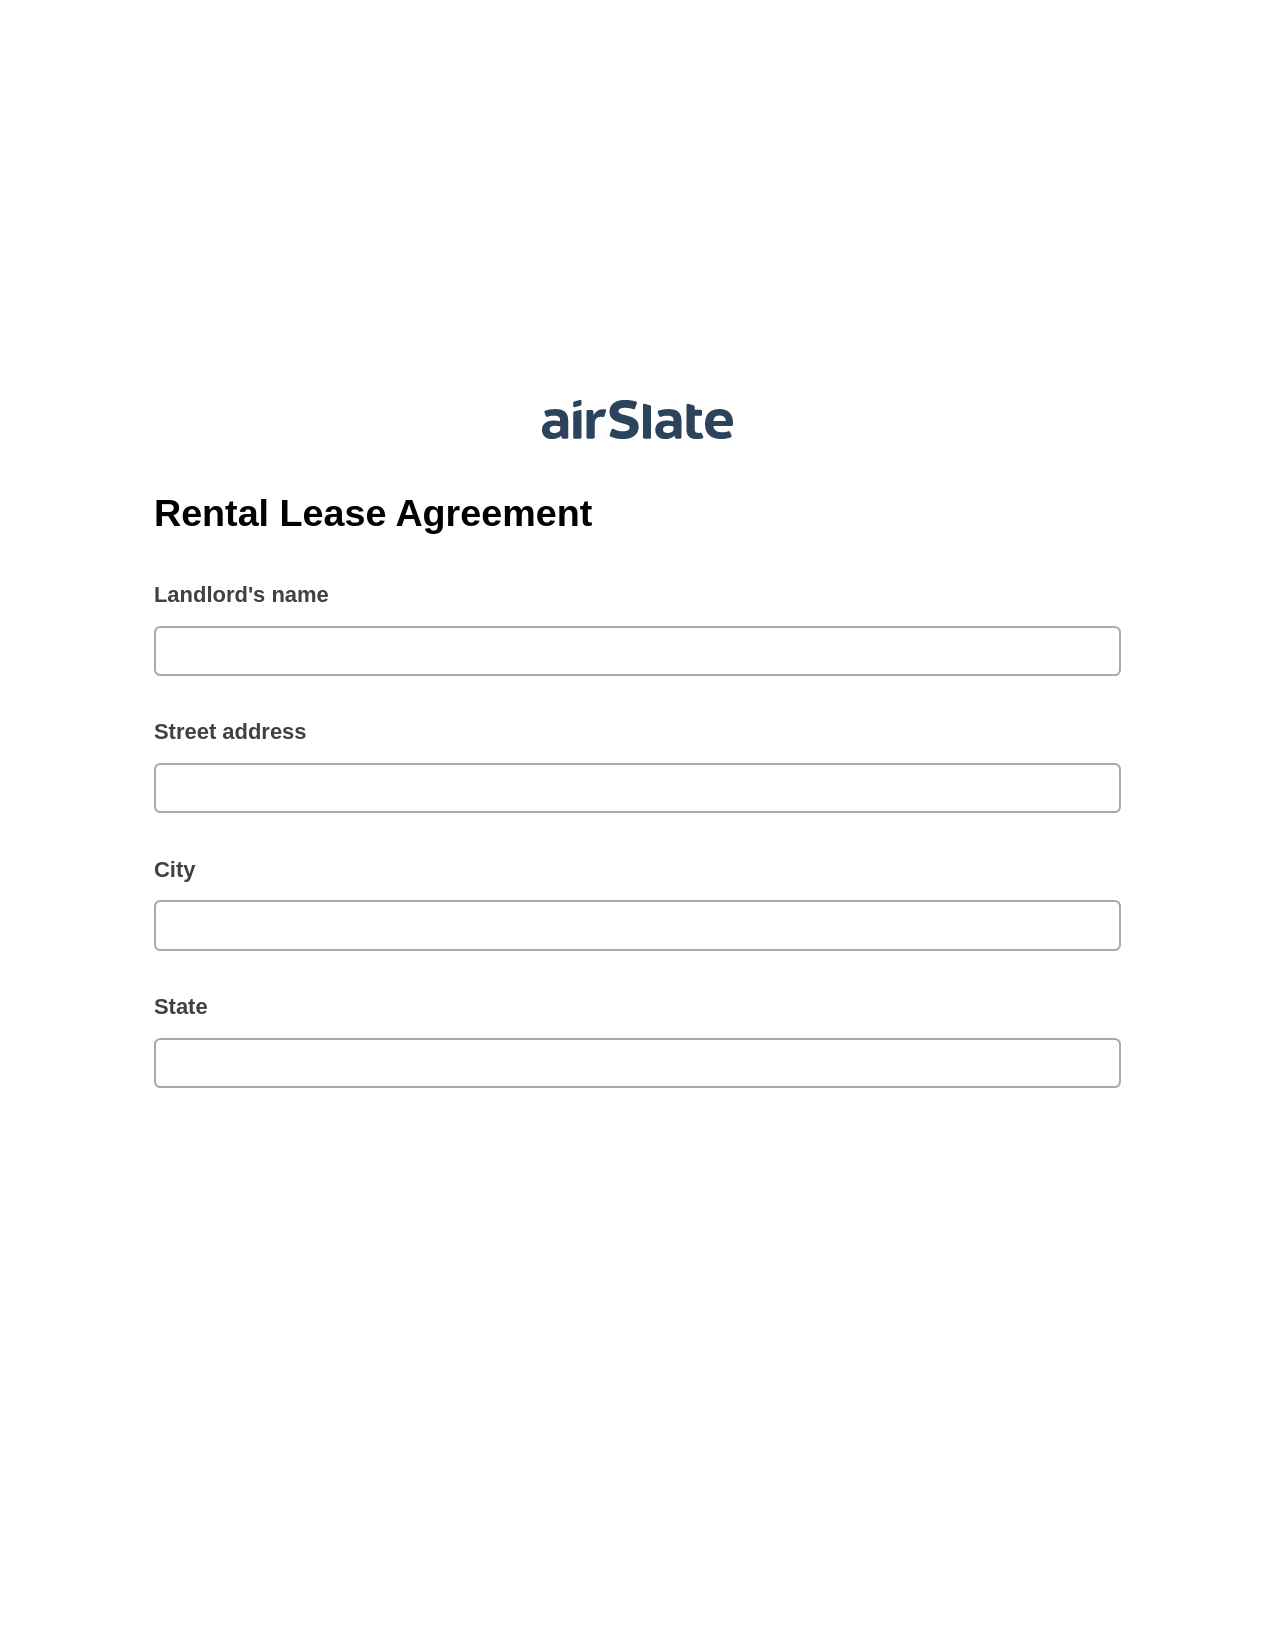 Rental Lease Agreement Pre-fill Slate from MS Dynamics 365 Records Bot, Google Cloud Print Bot, Export to Smartsheet